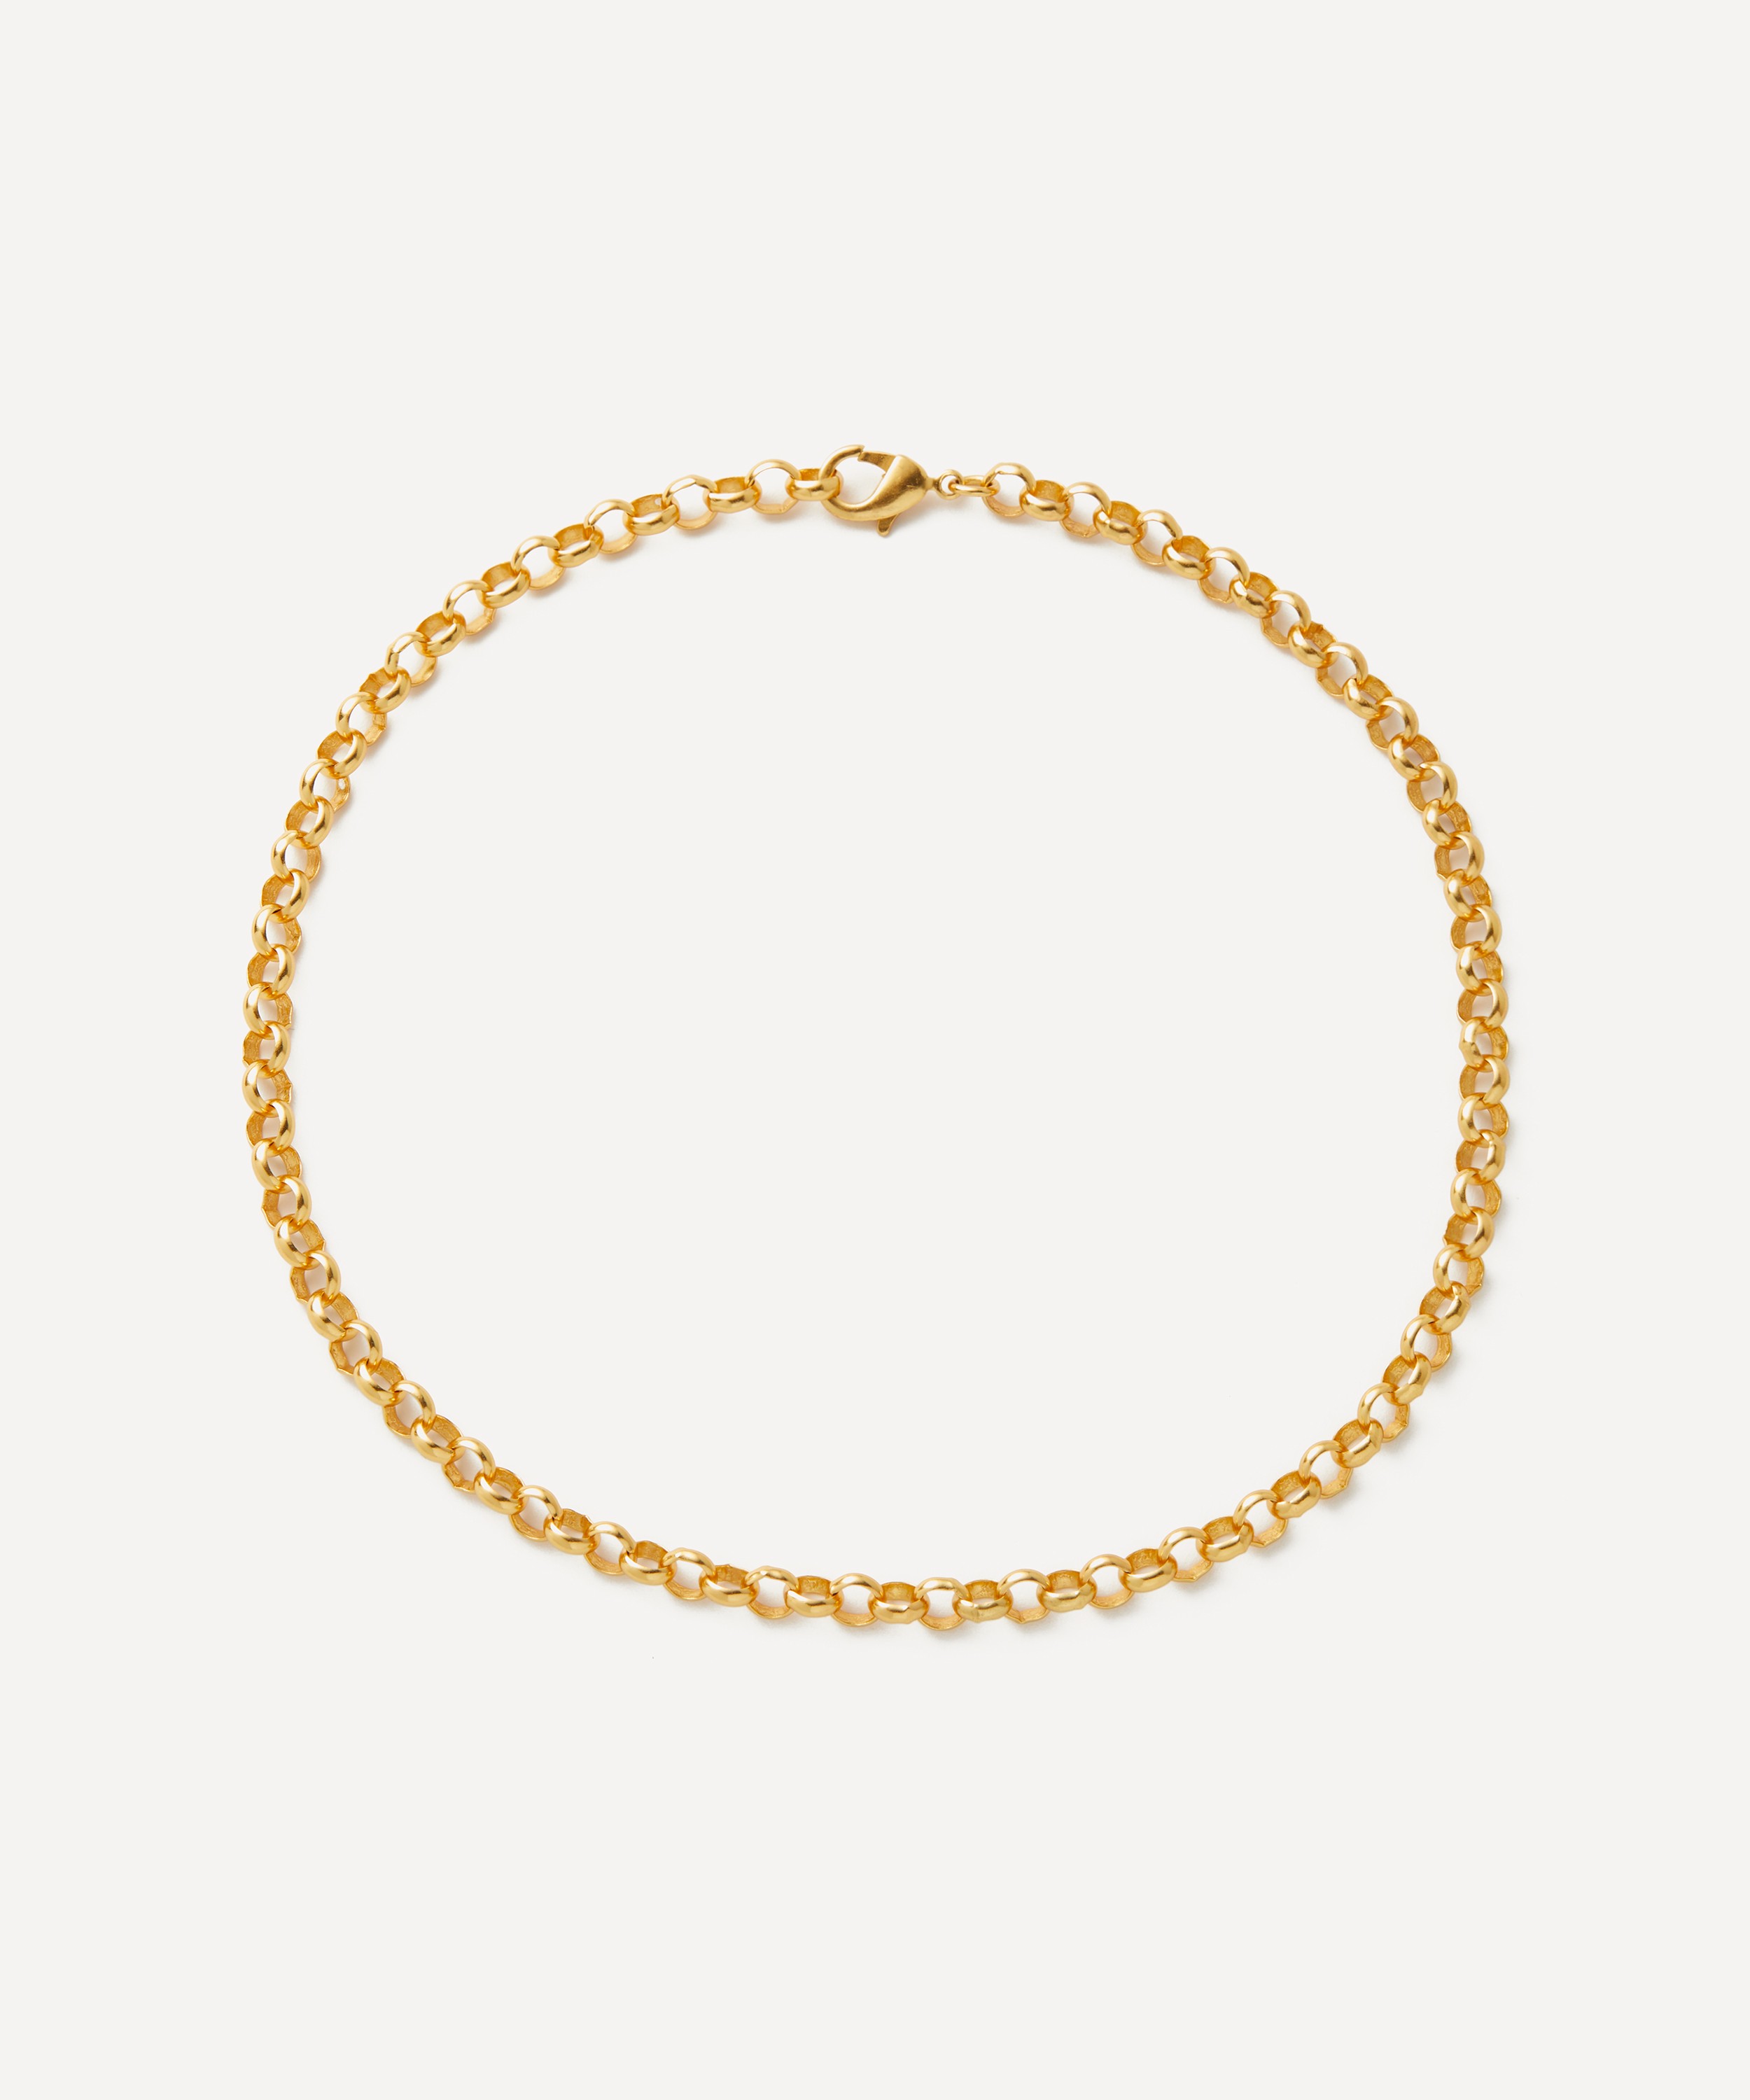 Shyla - 22ct Gold-Plated Palermo Chain Necklace